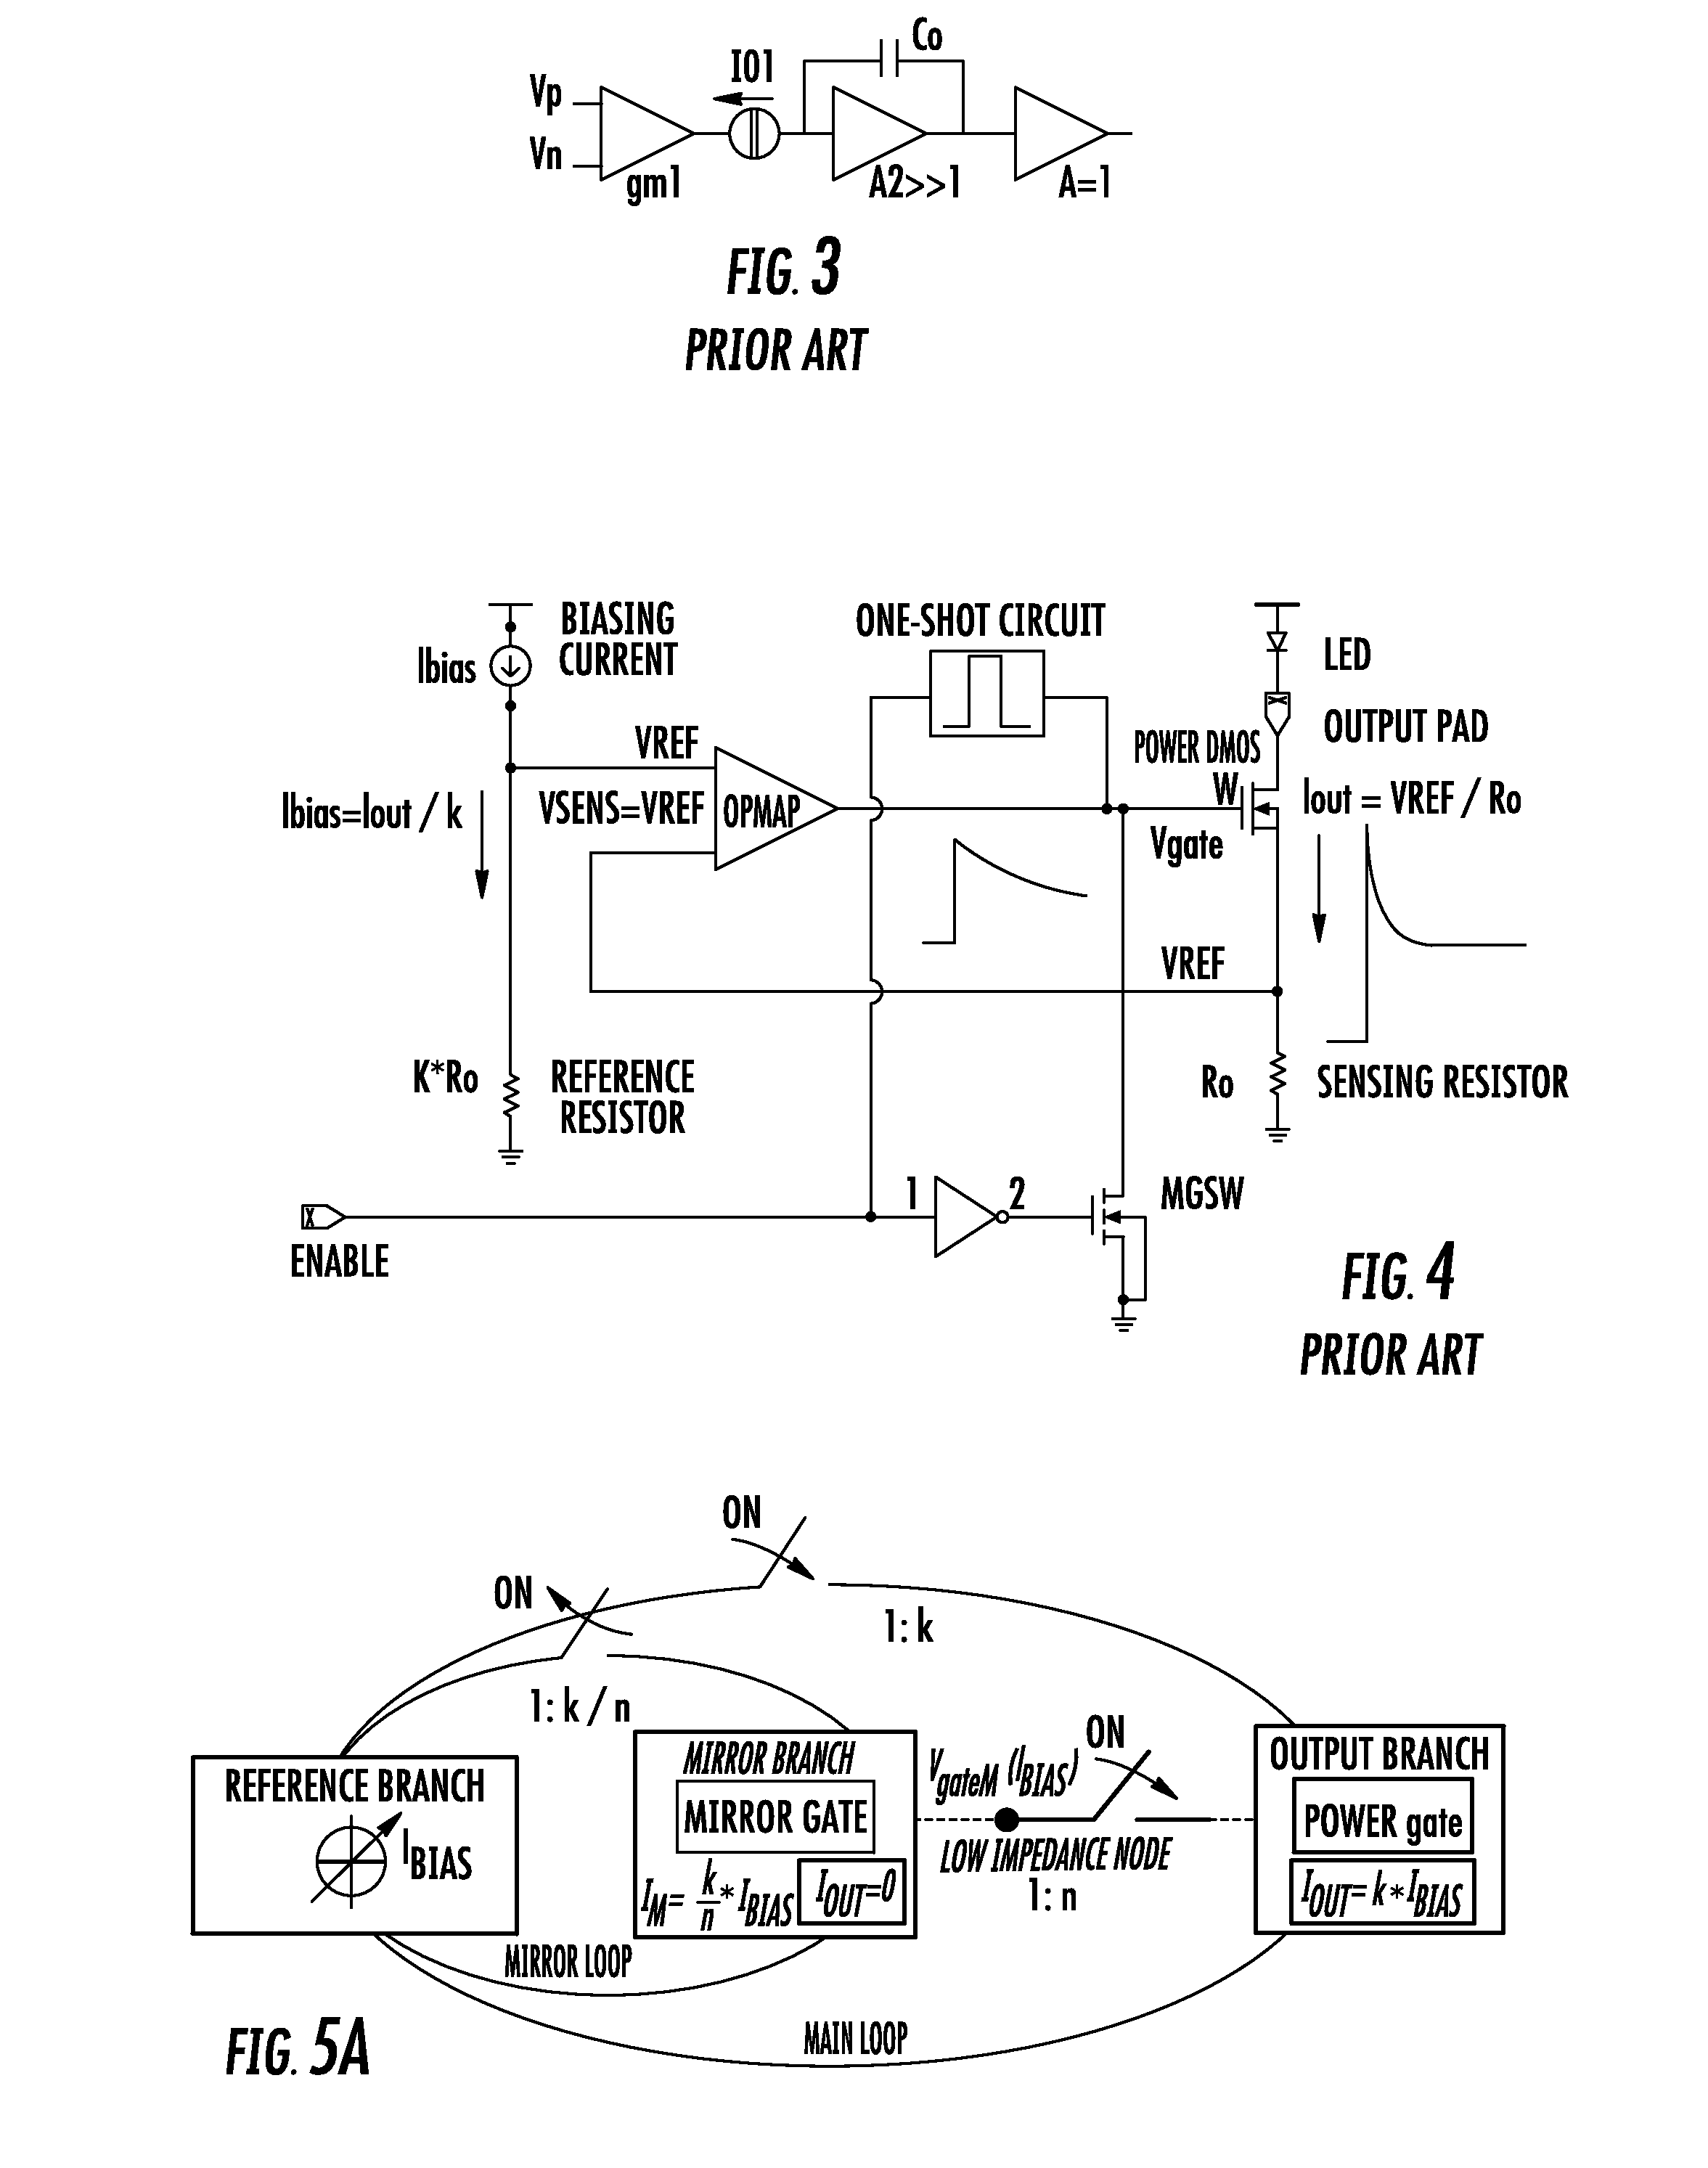 Fast switching, overshoot-free, current source and method